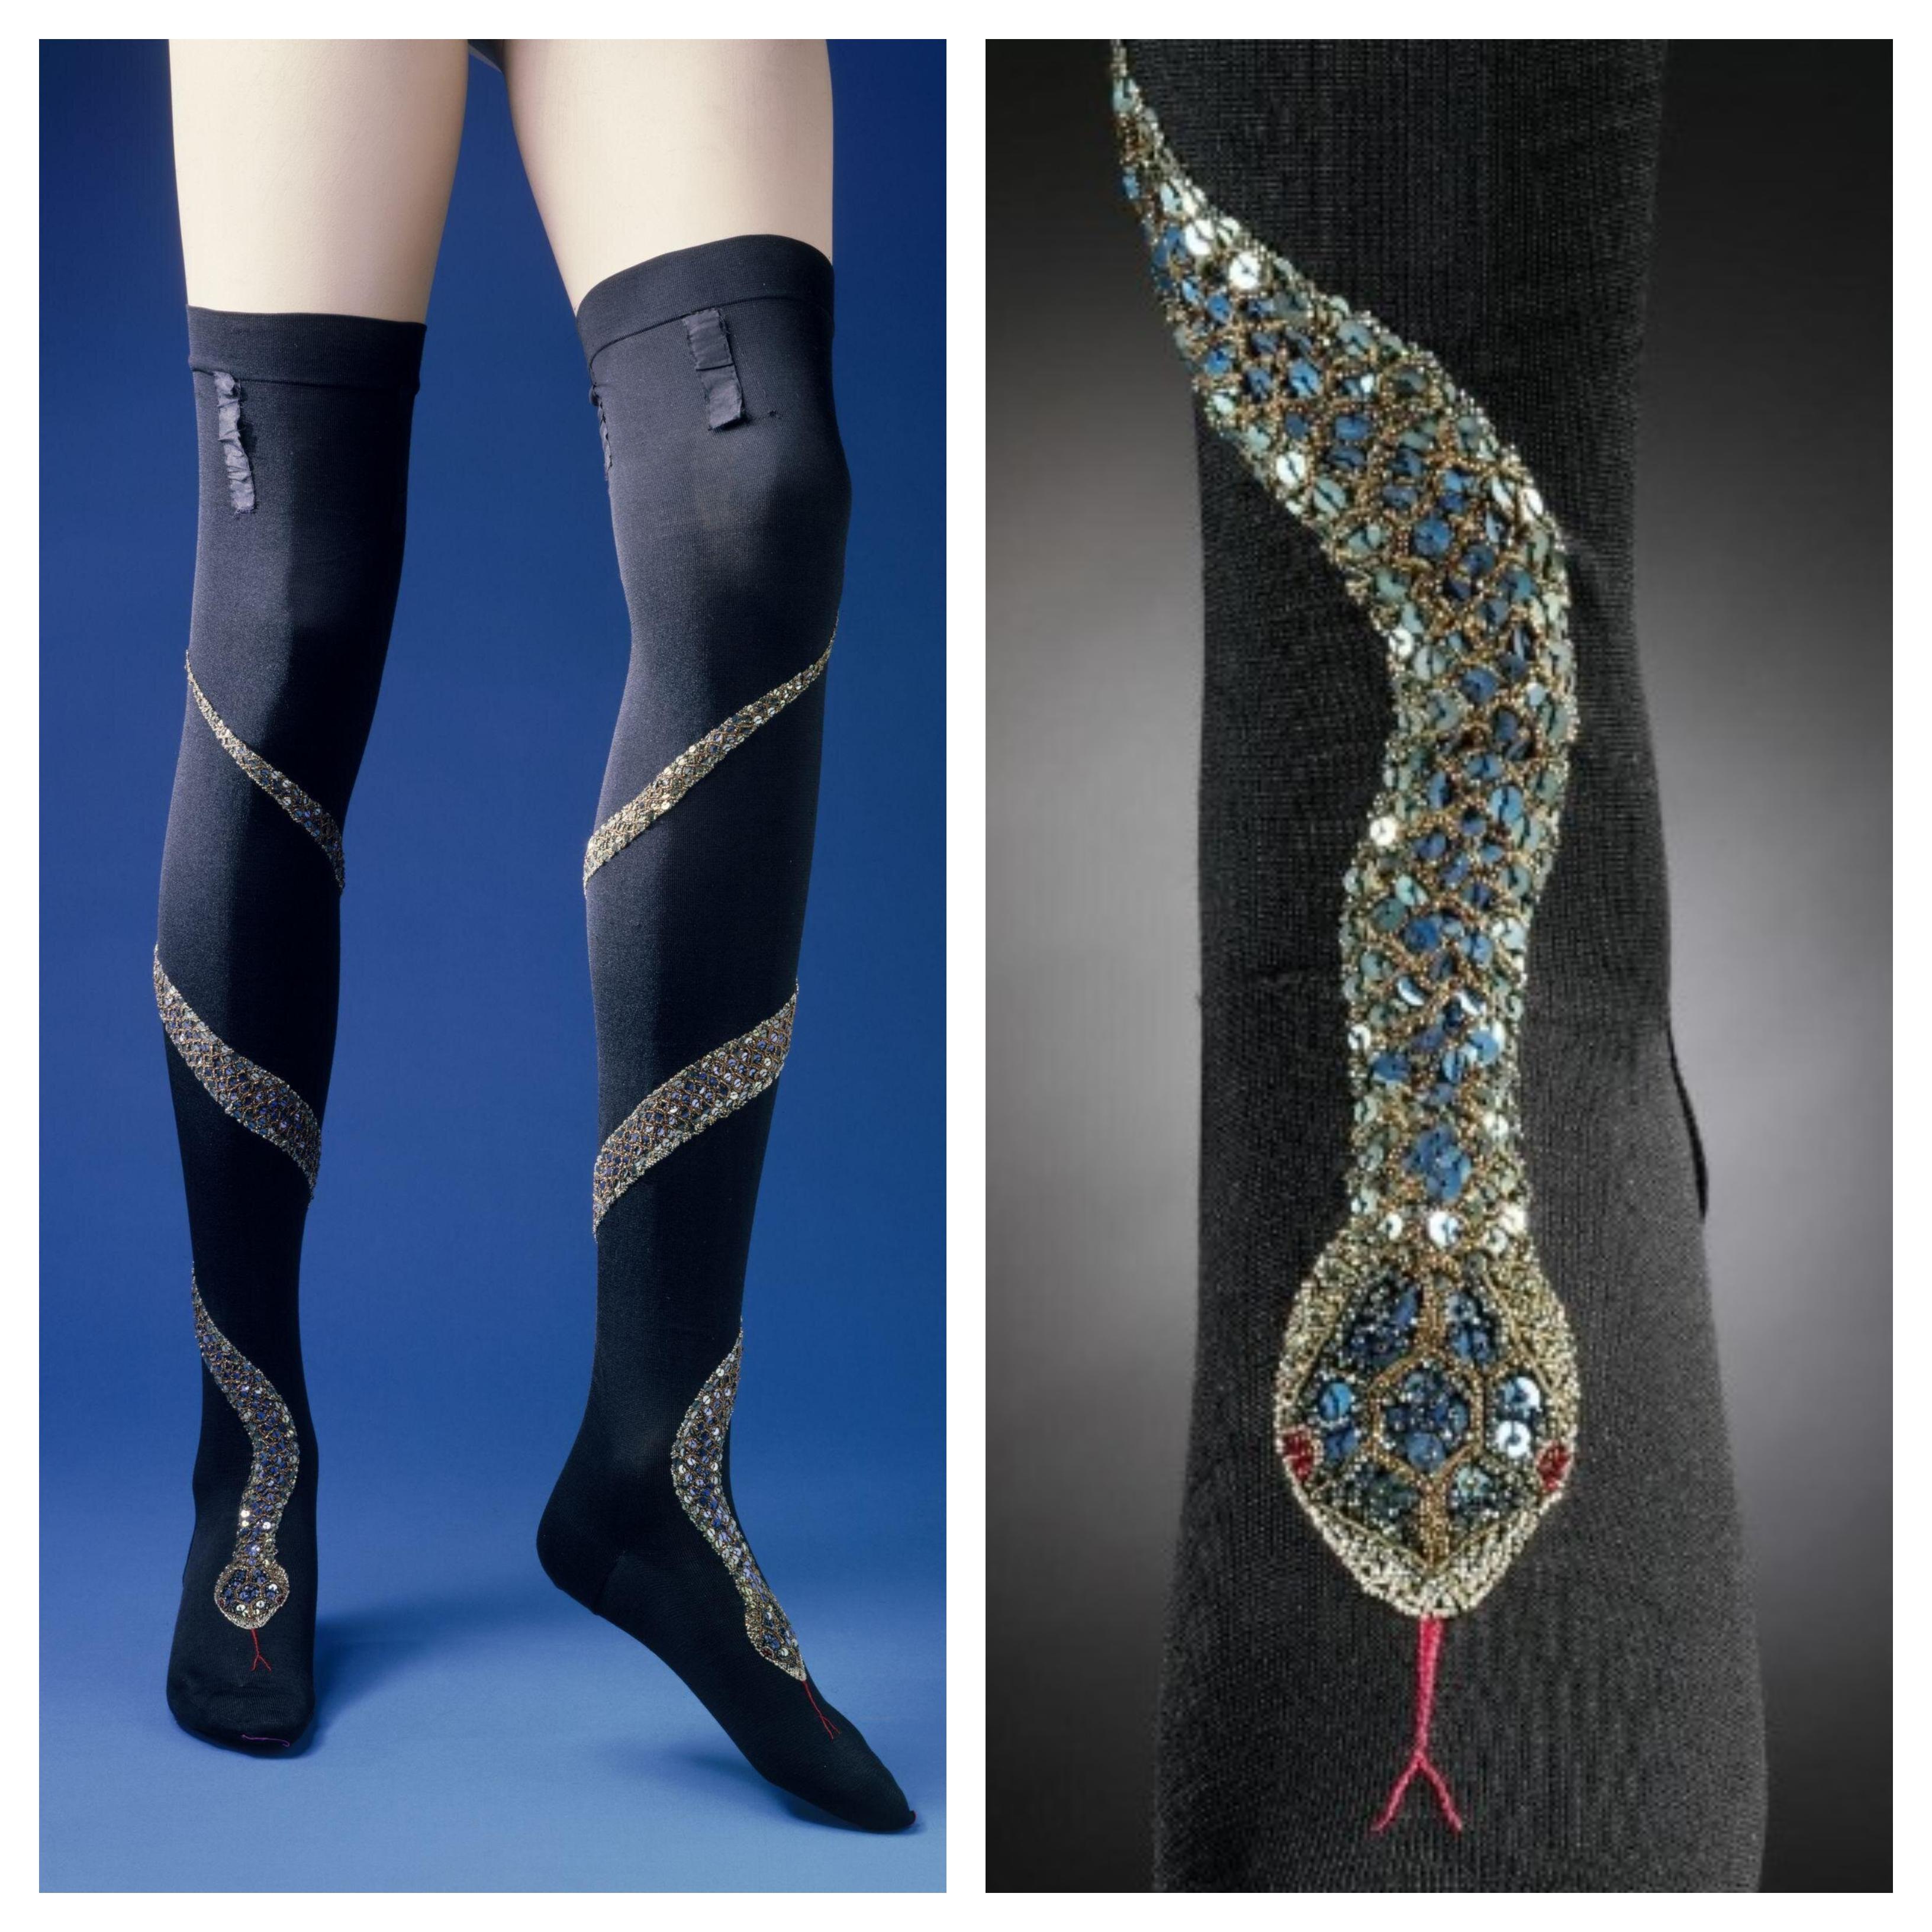 Silk stockings decorated with winding silver snake, France, 1900.jpg